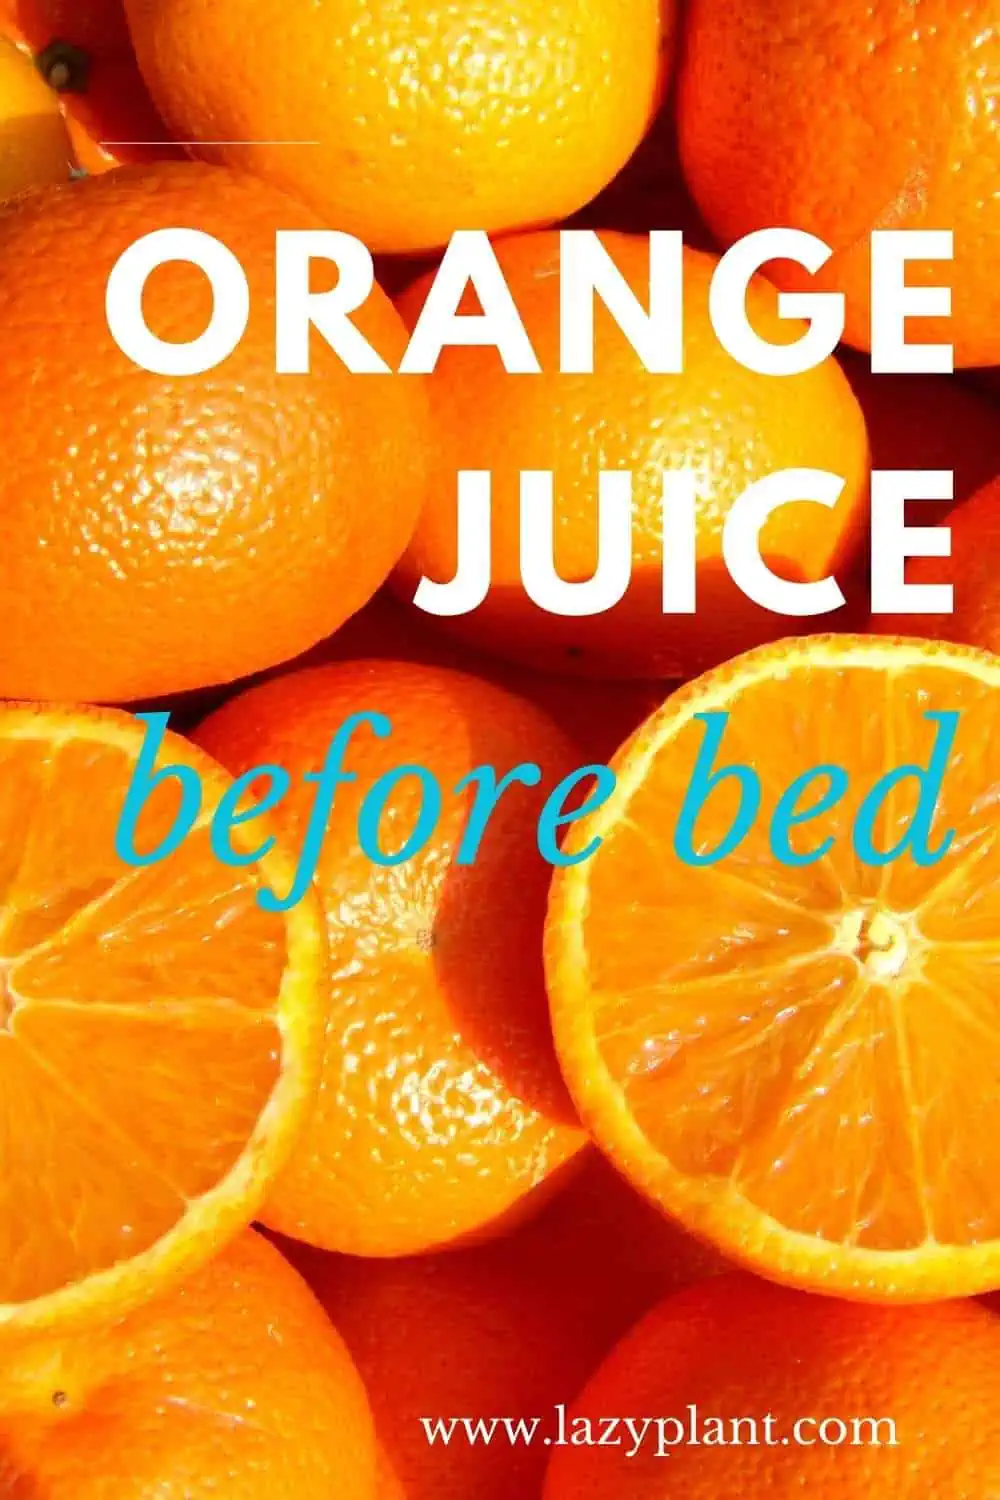 How much orange juice can I drink at dinner for better sleep & weight loss?